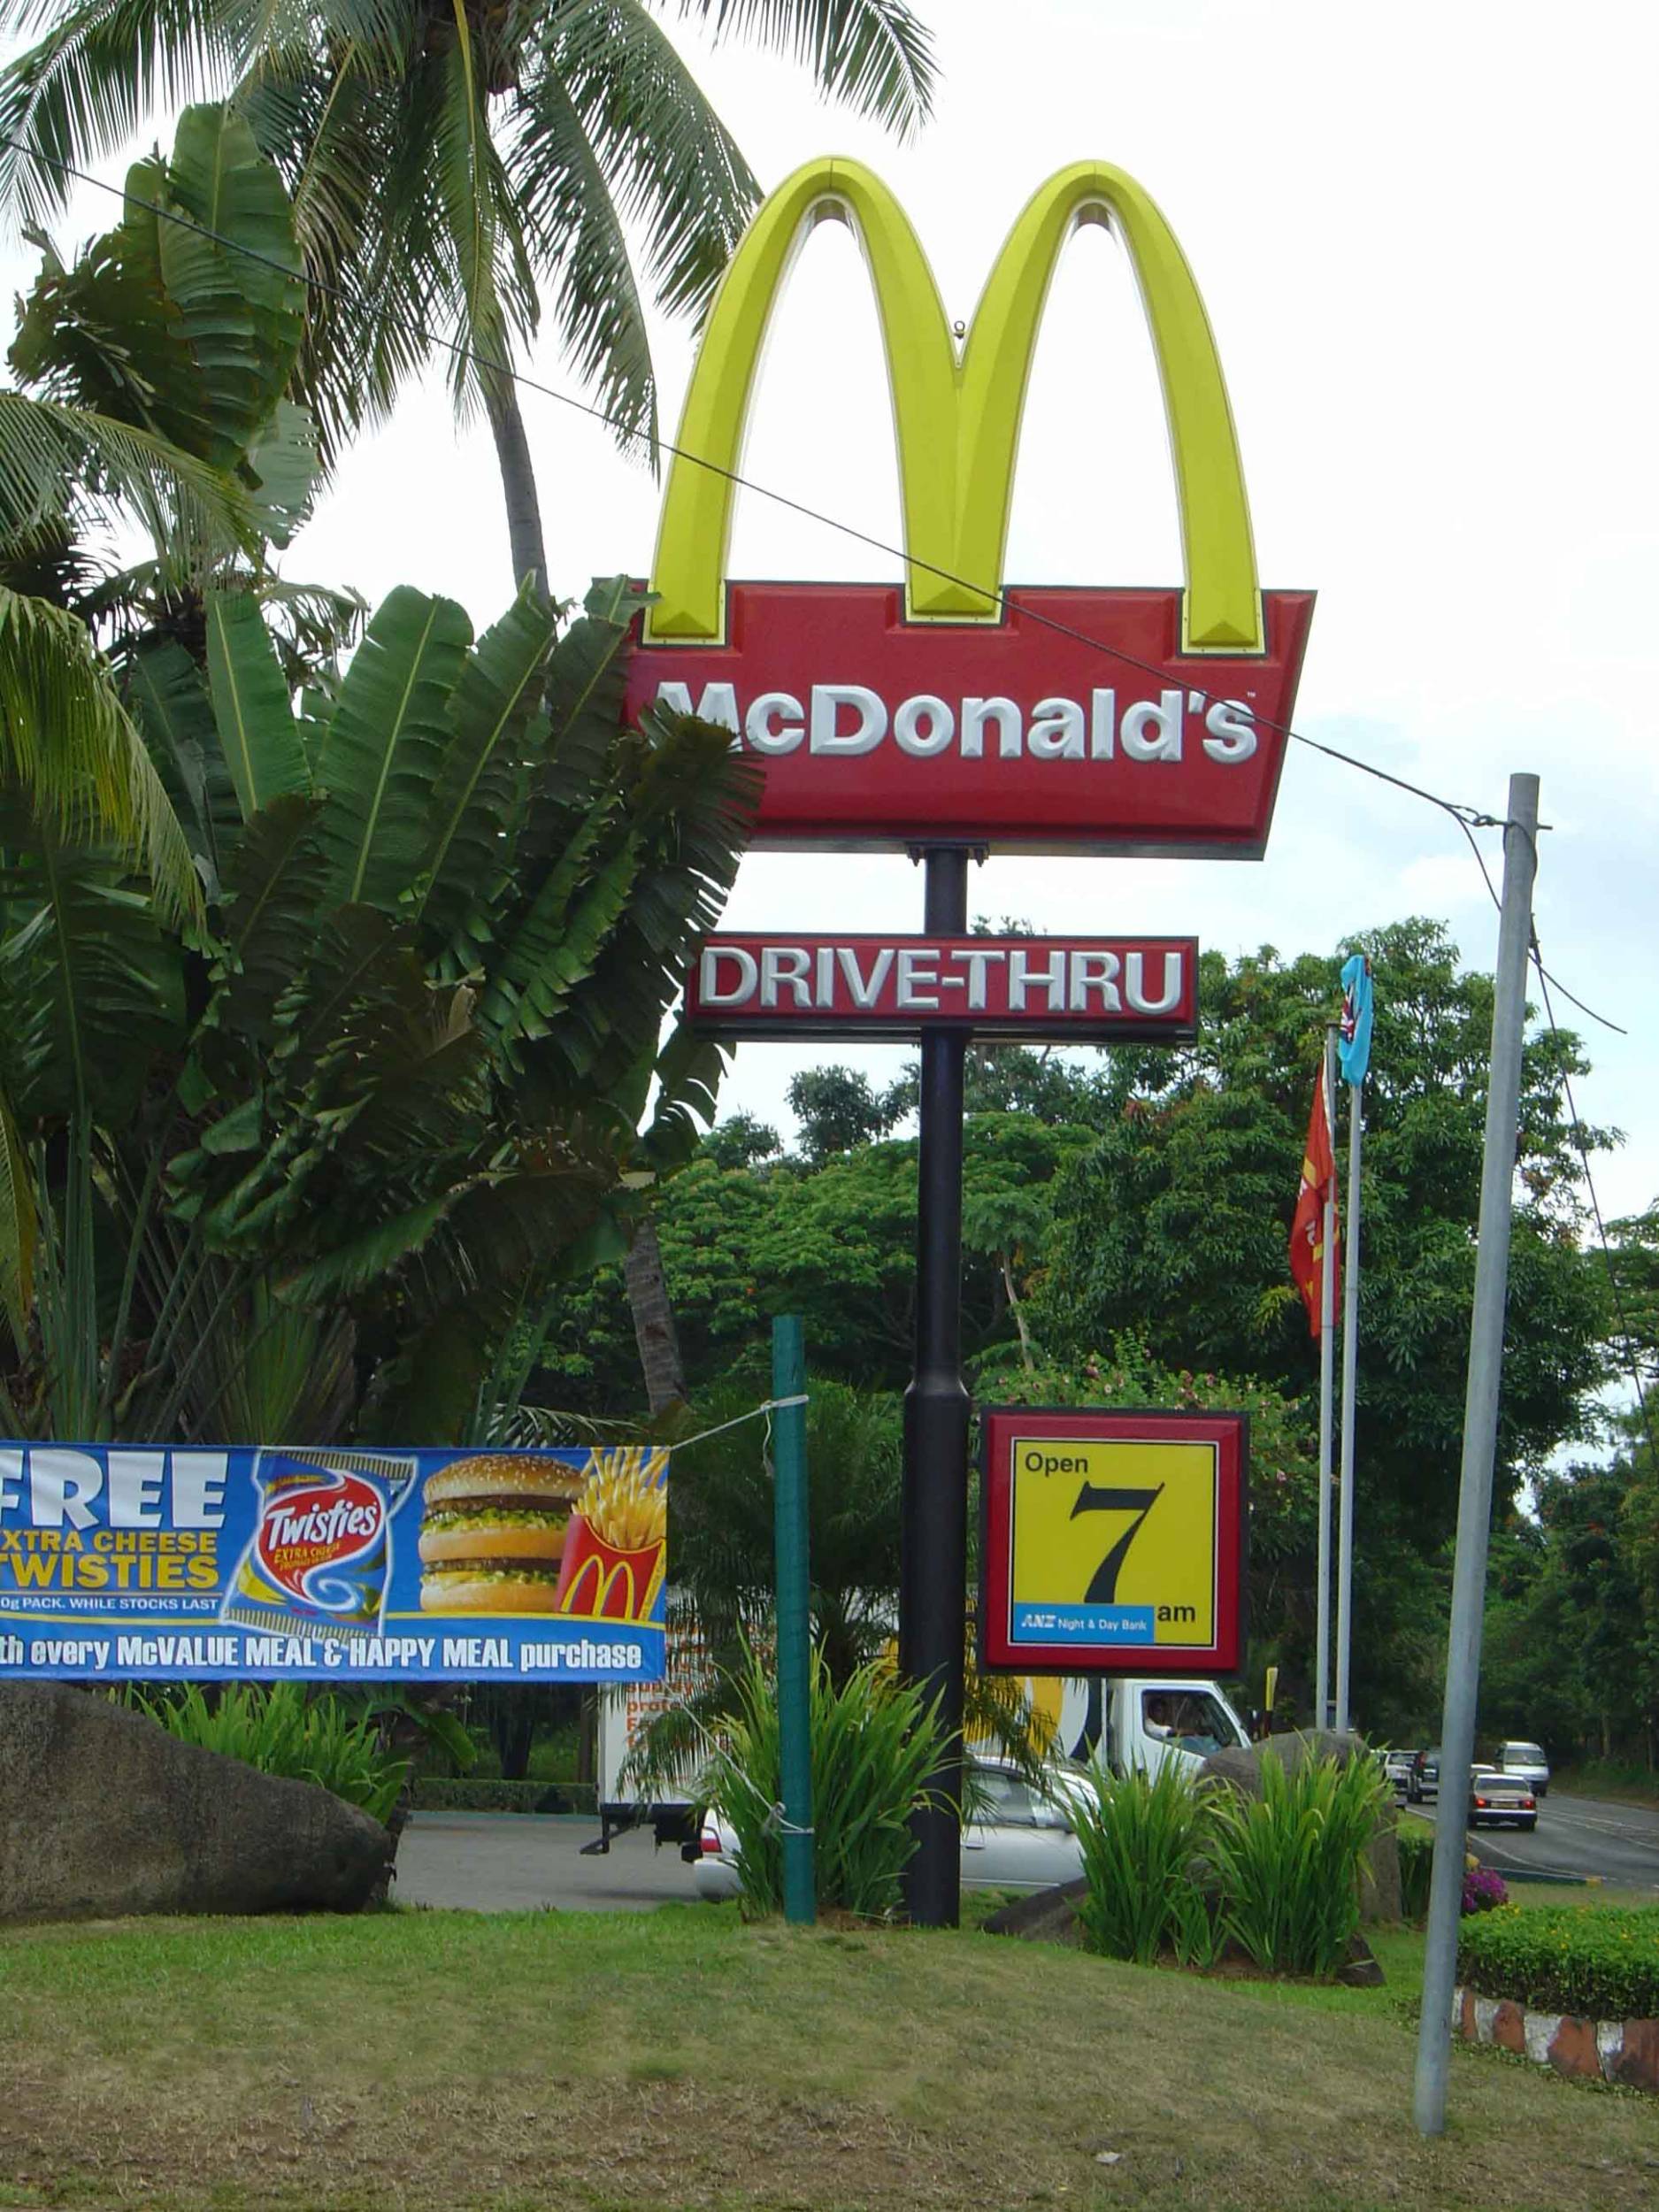 Does everyone who goes to Fiji get a photo of this? ;)